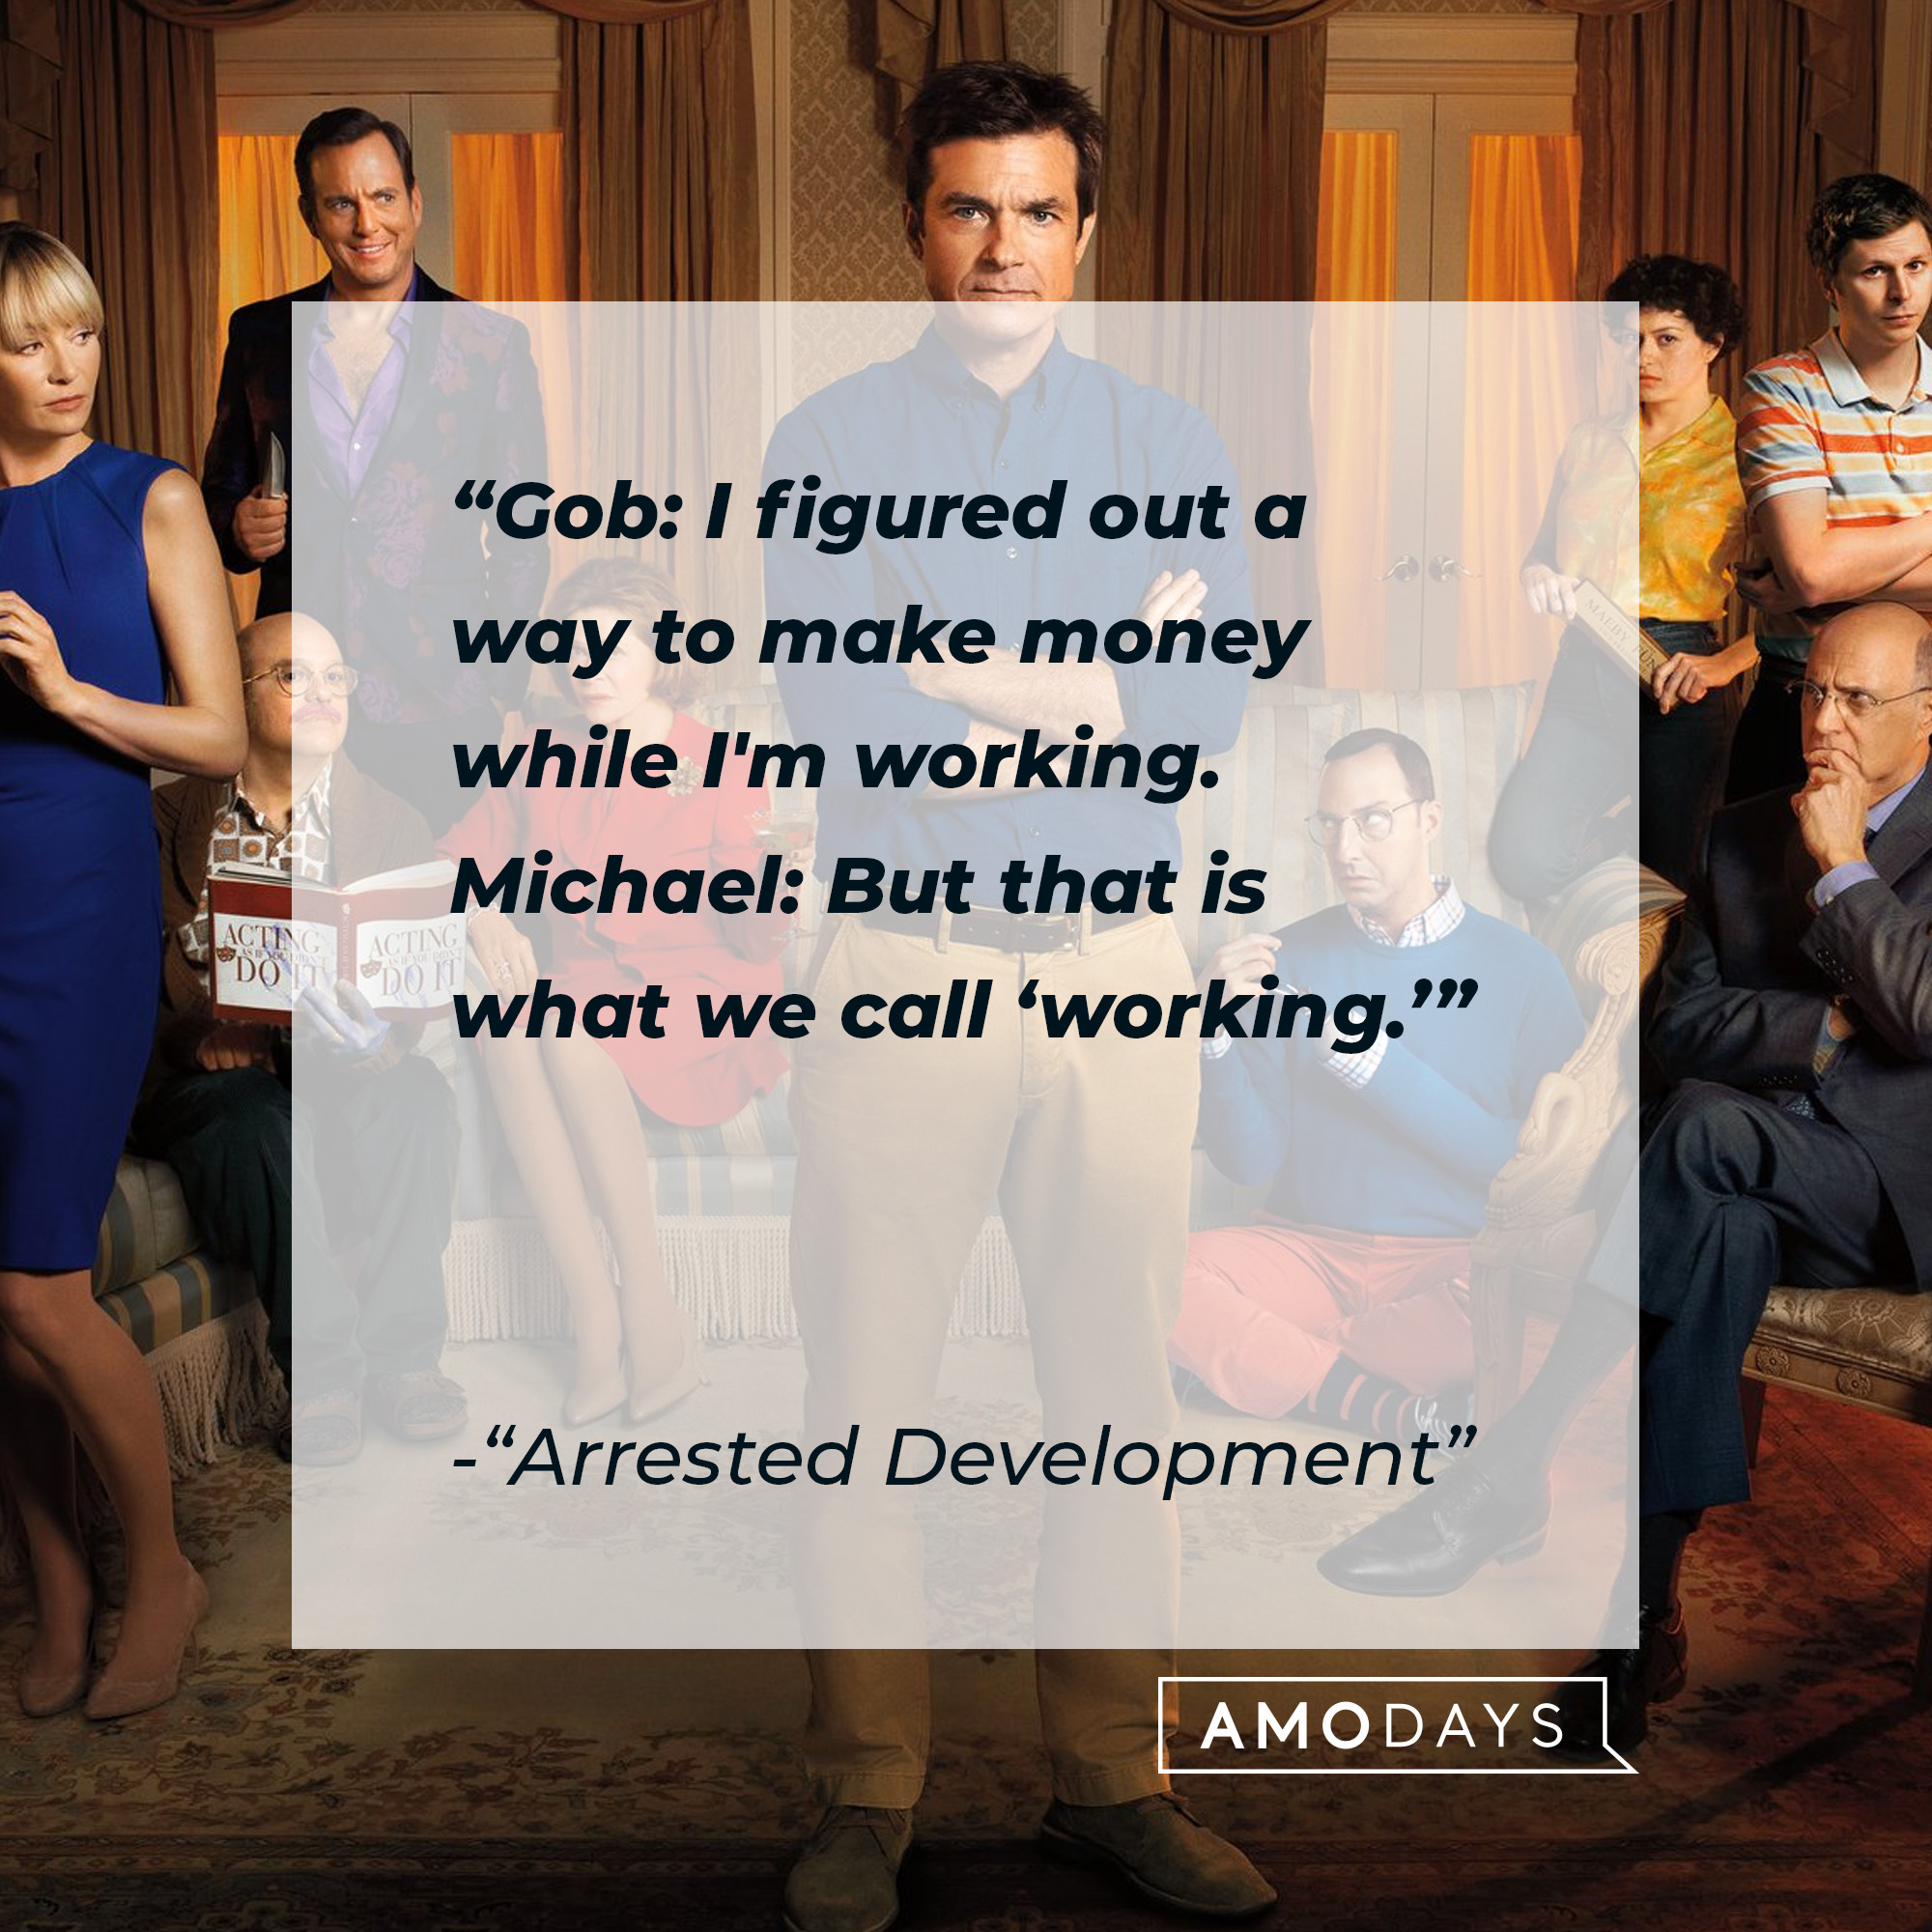 Quote from "Arrested Development:" "Gob: I figured out a way to make money while I'm working. Michael: But that is what we call 'working.'" | Source: facebook.com/ArrestedDevelopment